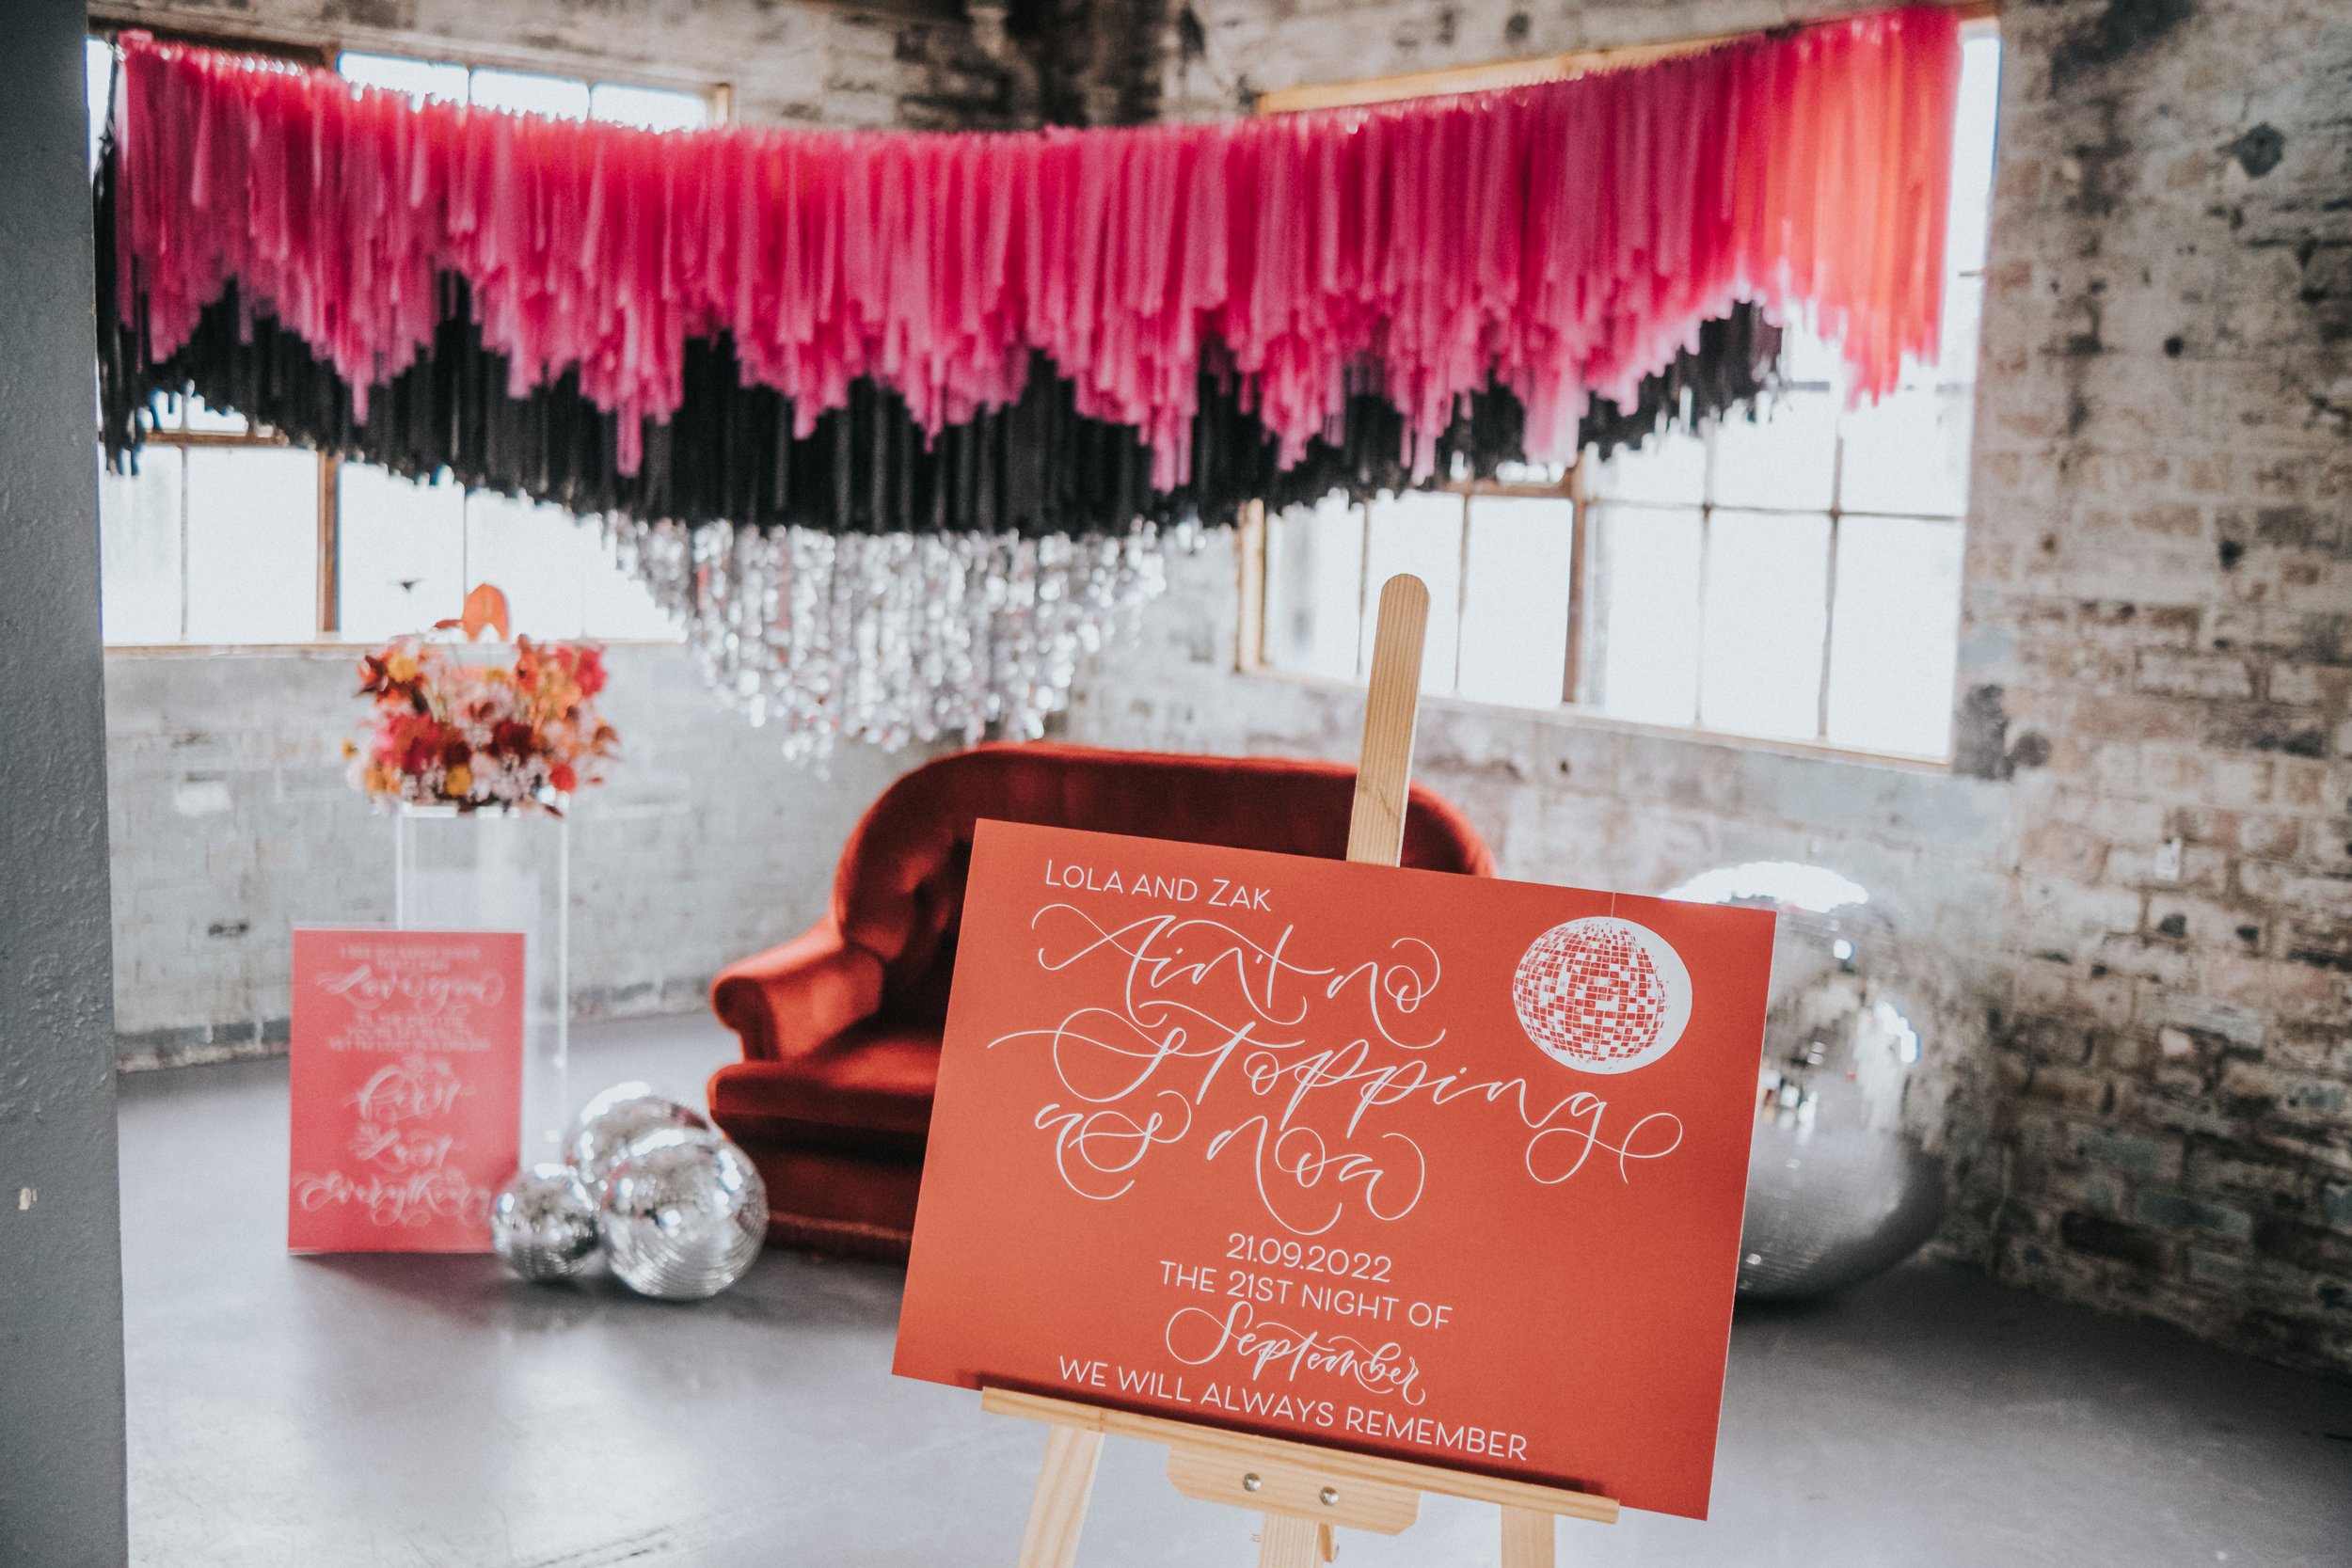 Disco themed wedding stationery with pink, black, grey and red colour scheme - disco ball wedding - calligraphy wedding signage and welcome signs.jpg